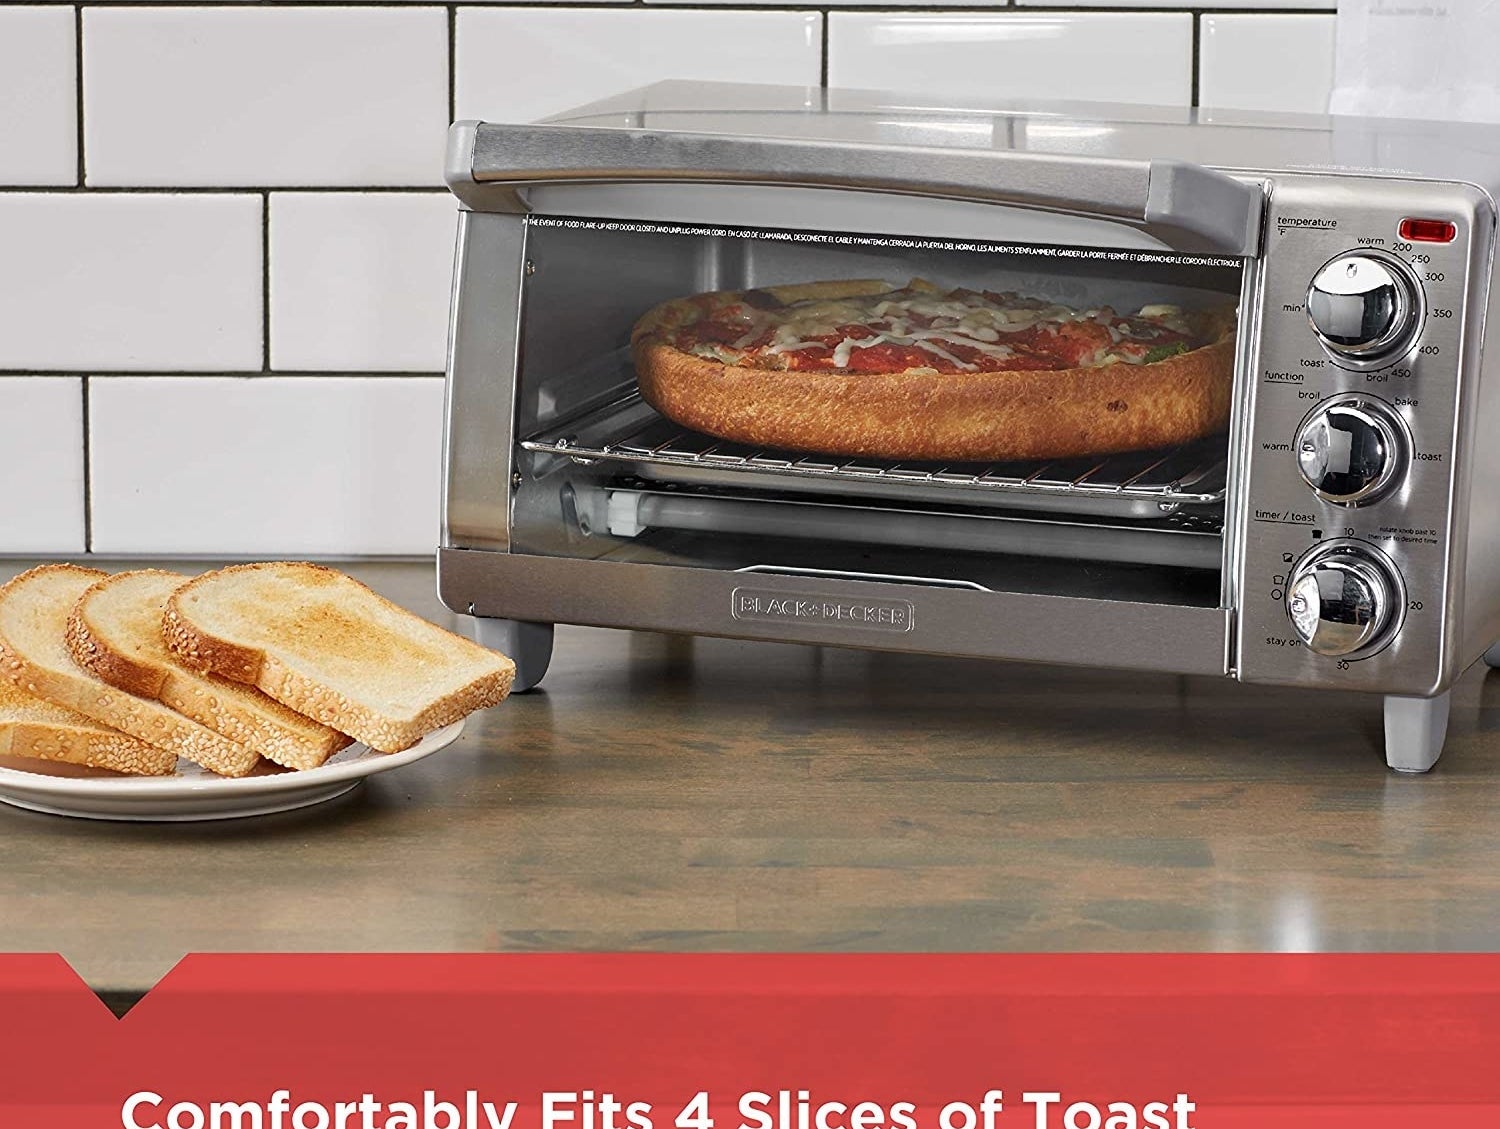 A stainless steel toaster oven with three round knobs and a glass door with a pizza inside